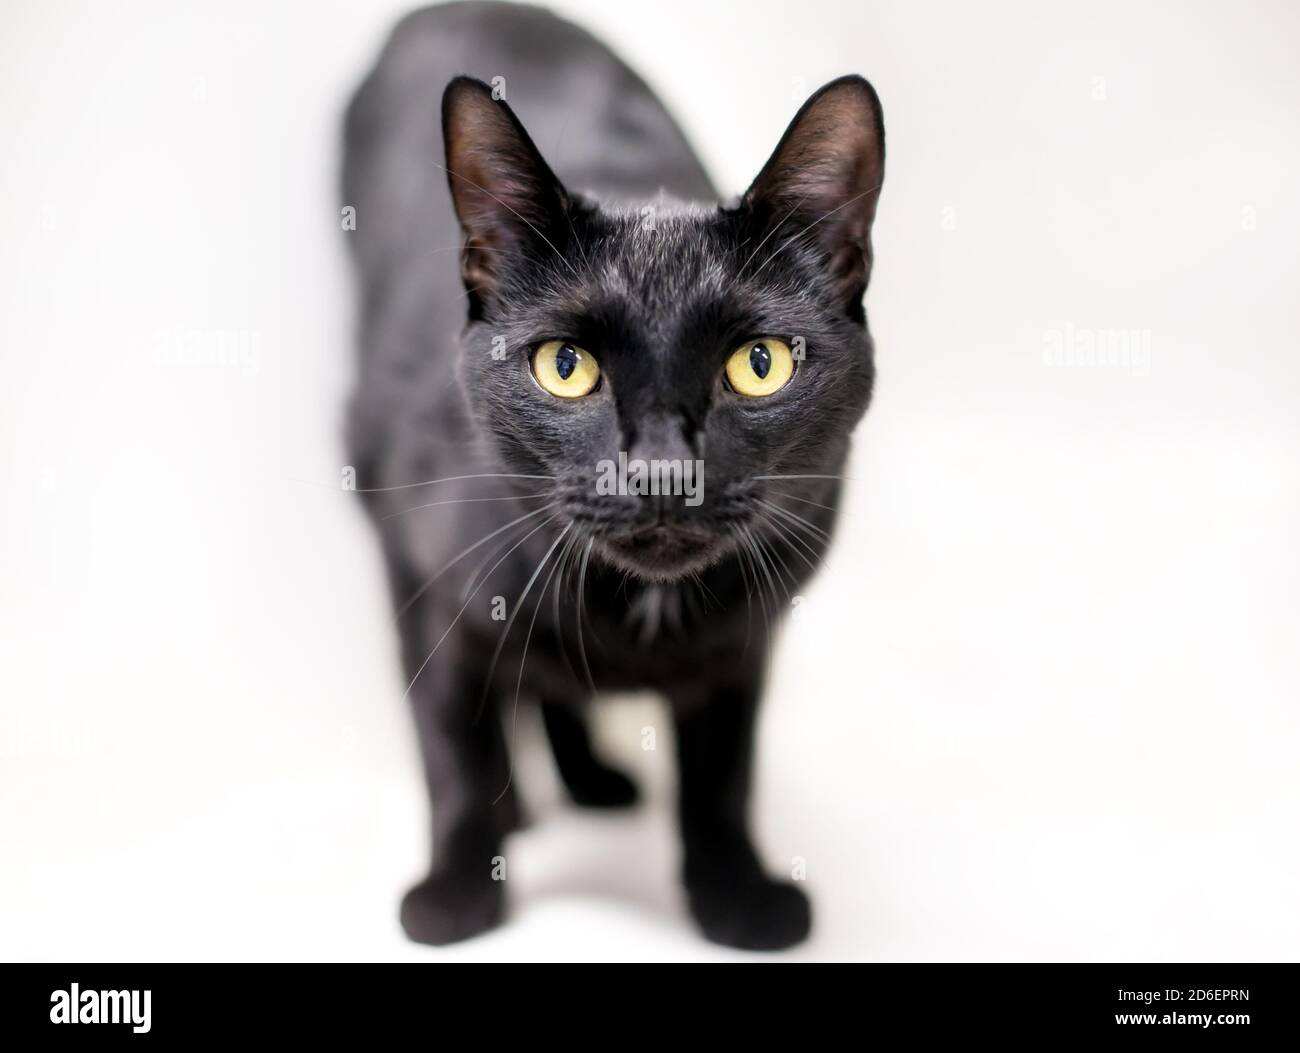 A black domestic shorthair cat with yellow eyes looking at the camera Stock Photo